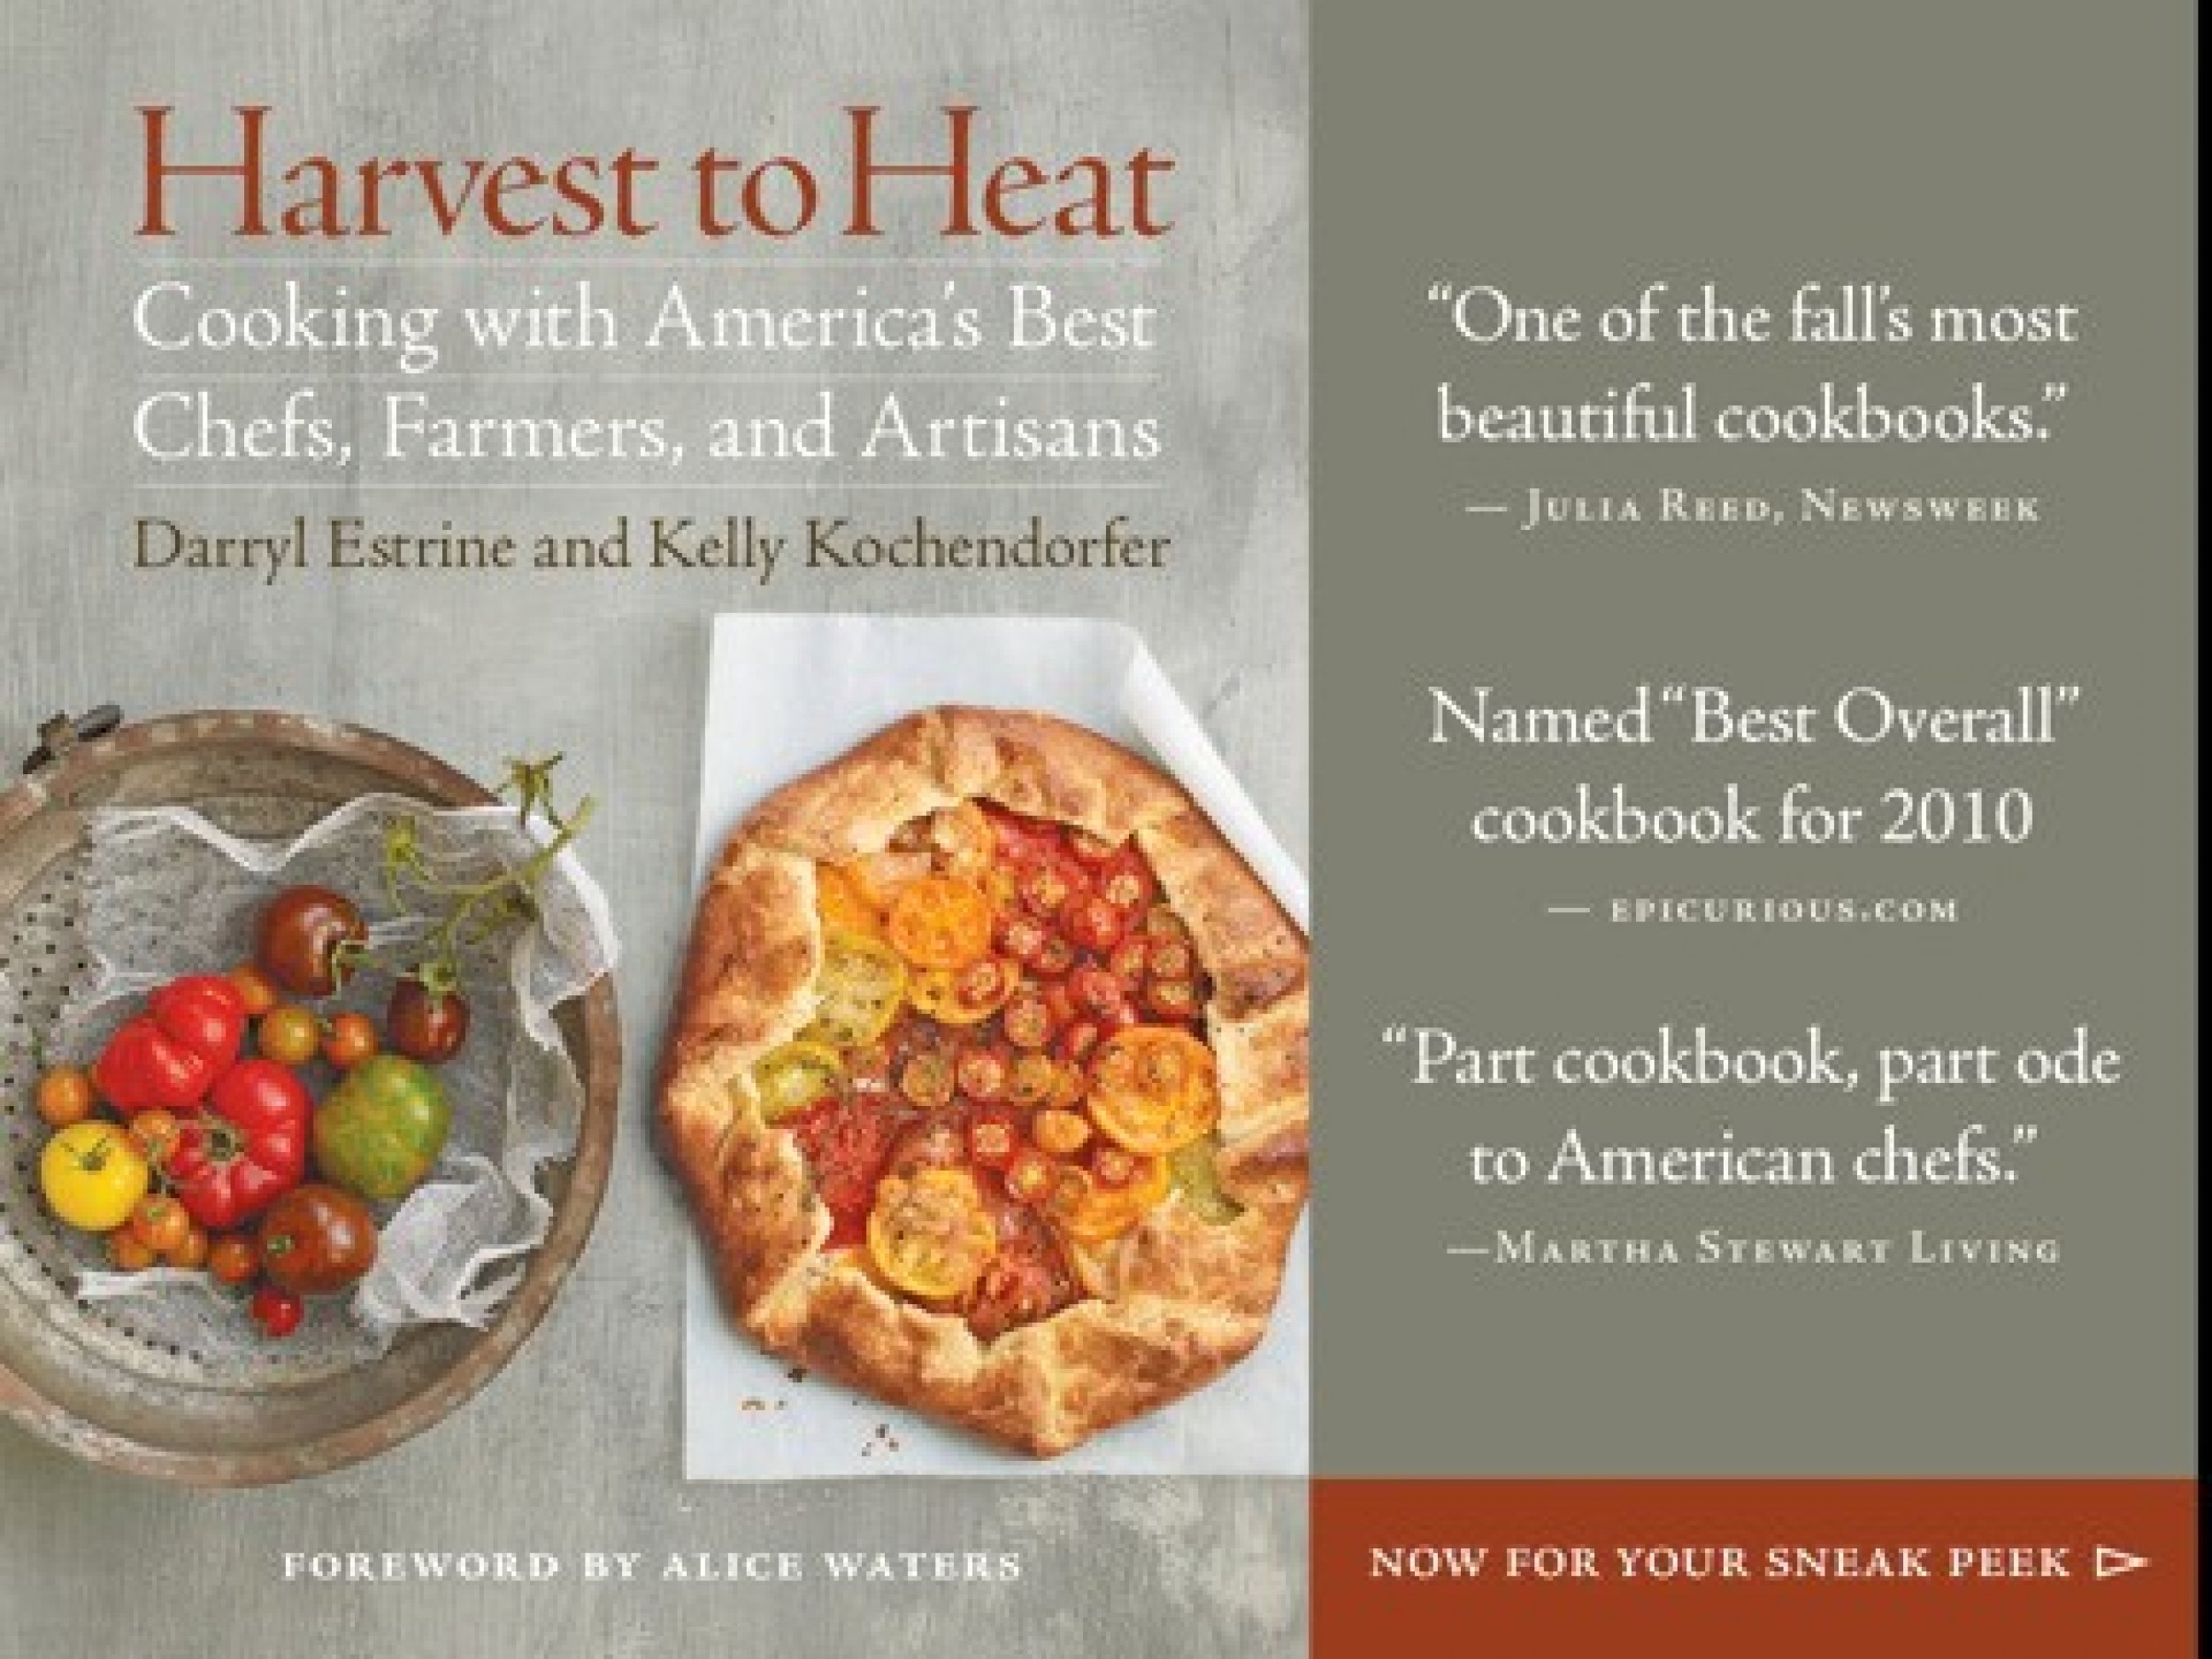 Recipes from Harvest to Heat 